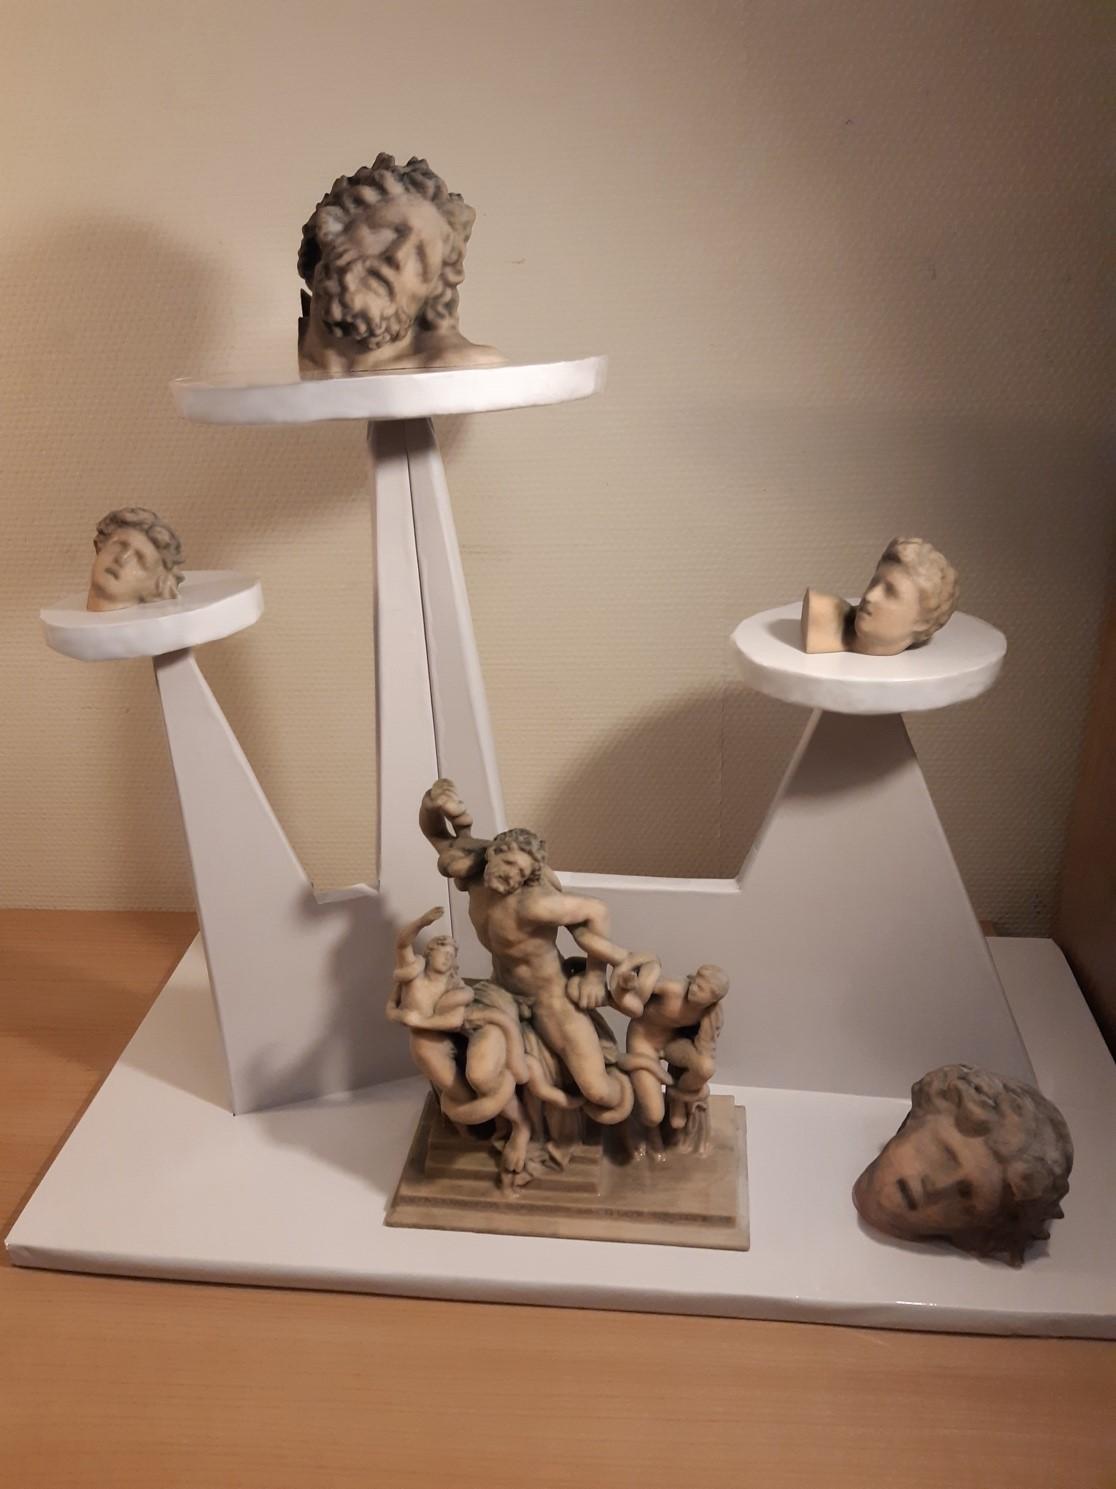 3D printed statues